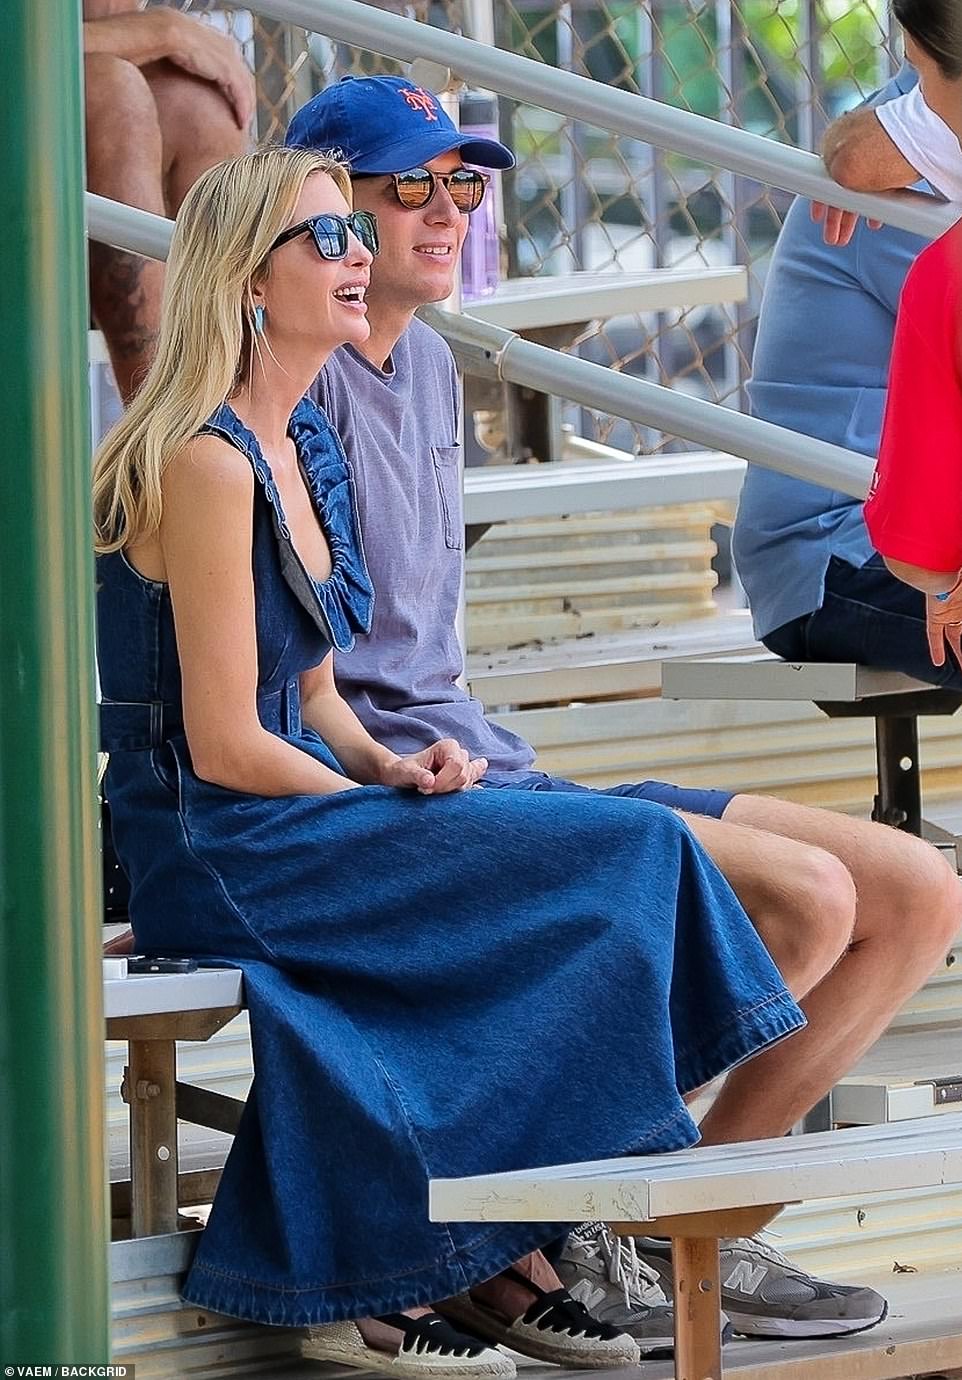 Ivanka and Jared seemed to be enjoying themselves as they chatted with another parent